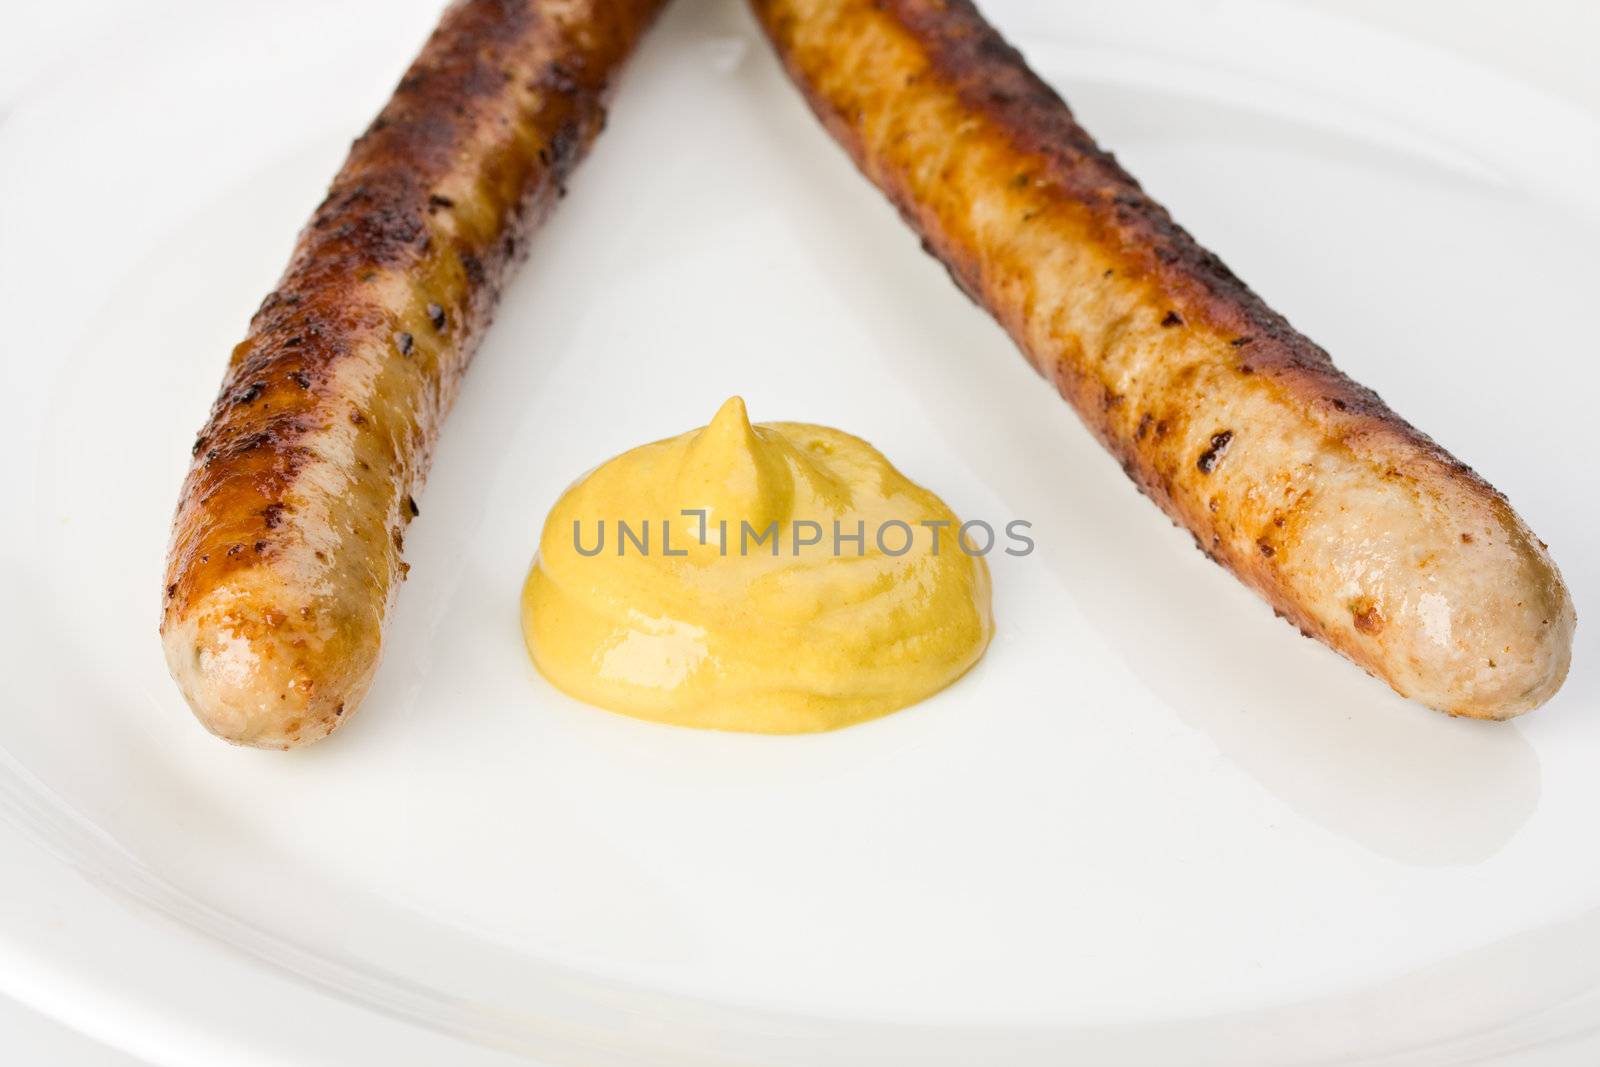 two grilled sausages on a plate with mustard by bernjuer